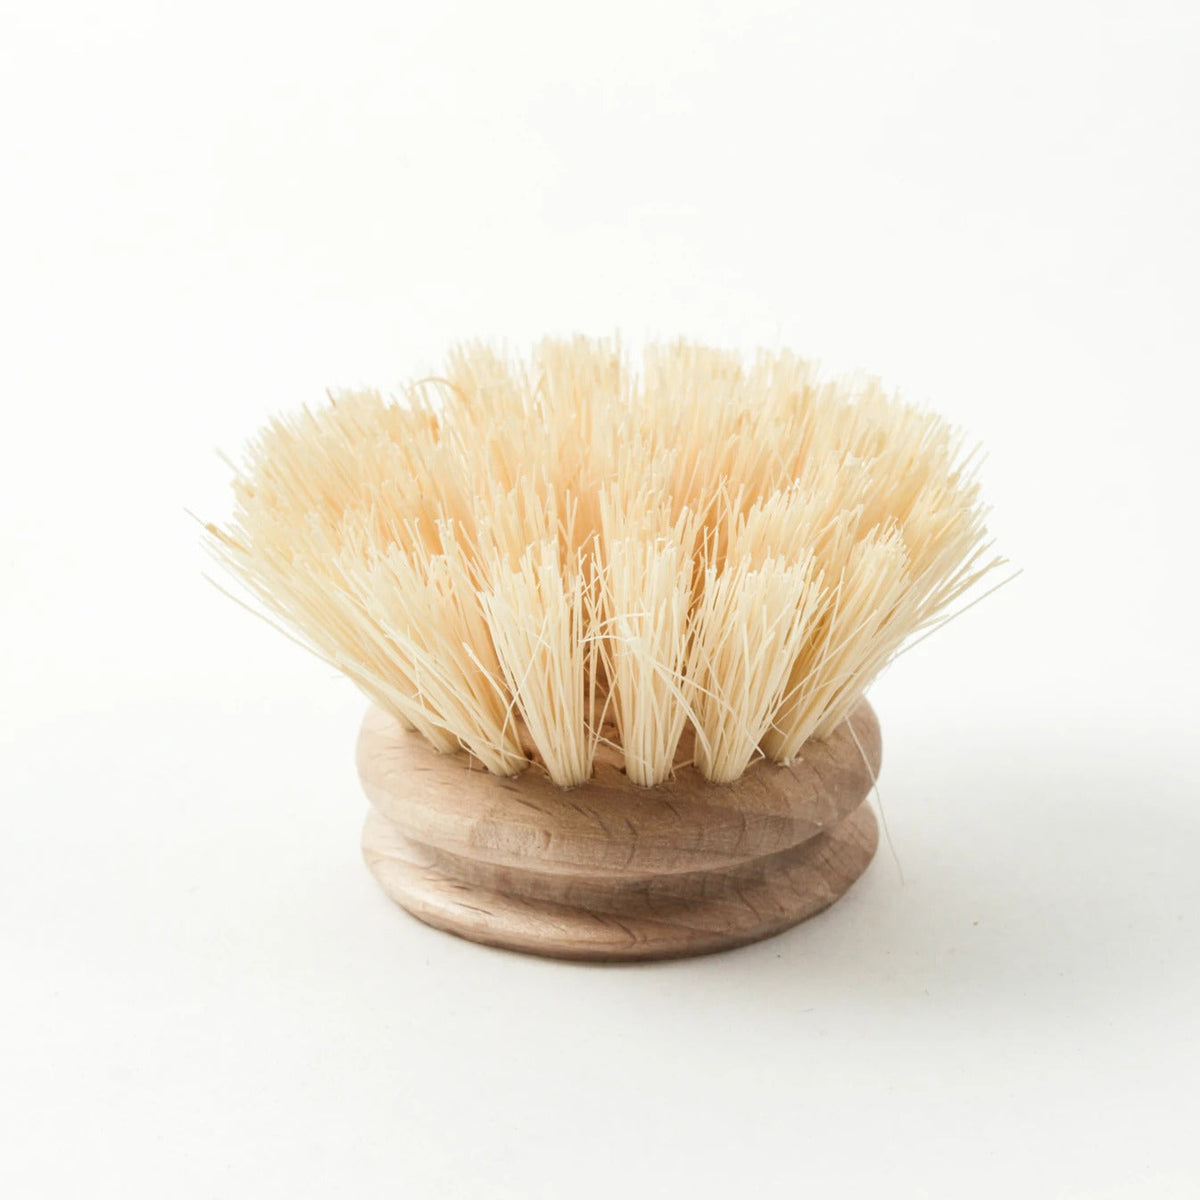 A wooden mushroom-shaped dish brush with stiff, natural bristles on a plain white background. (Andrée Jardin Tradition Handled Dish Brush from Andrée Jardin)